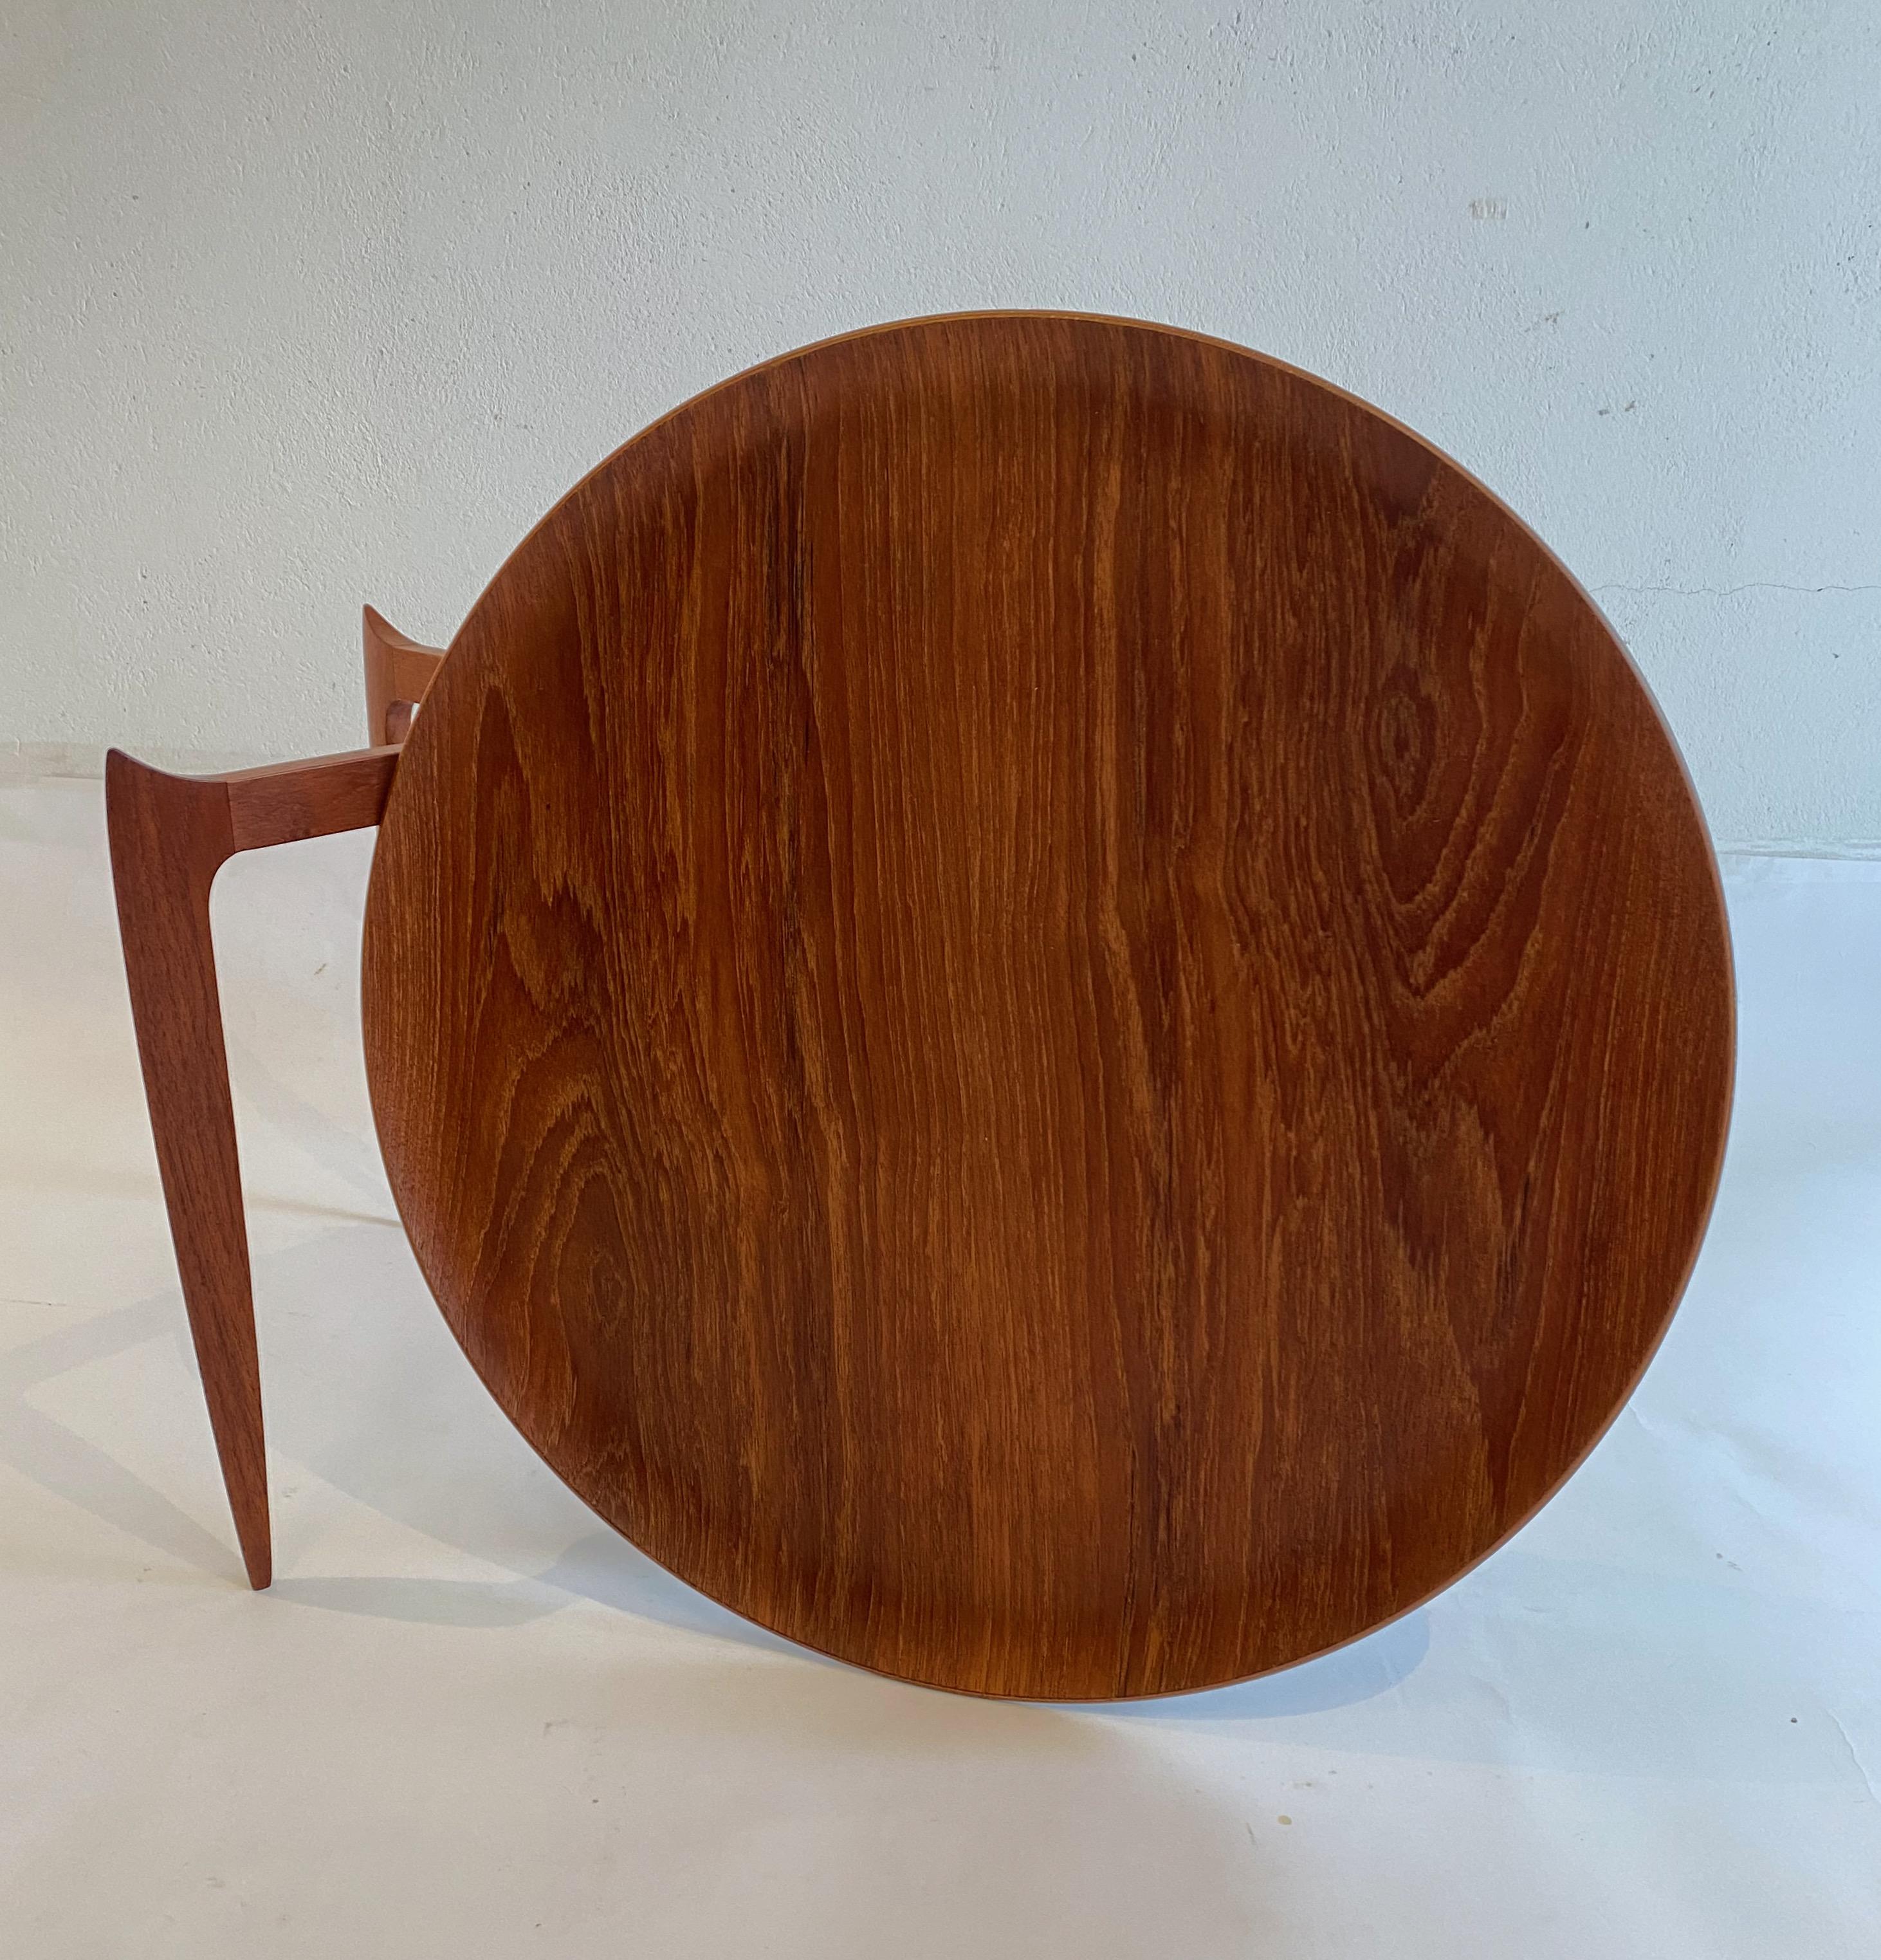 Early folding tray table designed by S.A. Willumsen & H. Engholm in 1958. Produced by Fritz Hansen during the 1950-60s. Folding base made from solid teak and metal hinges. Tray made from laminated teak. Signed with makers signature. Very good